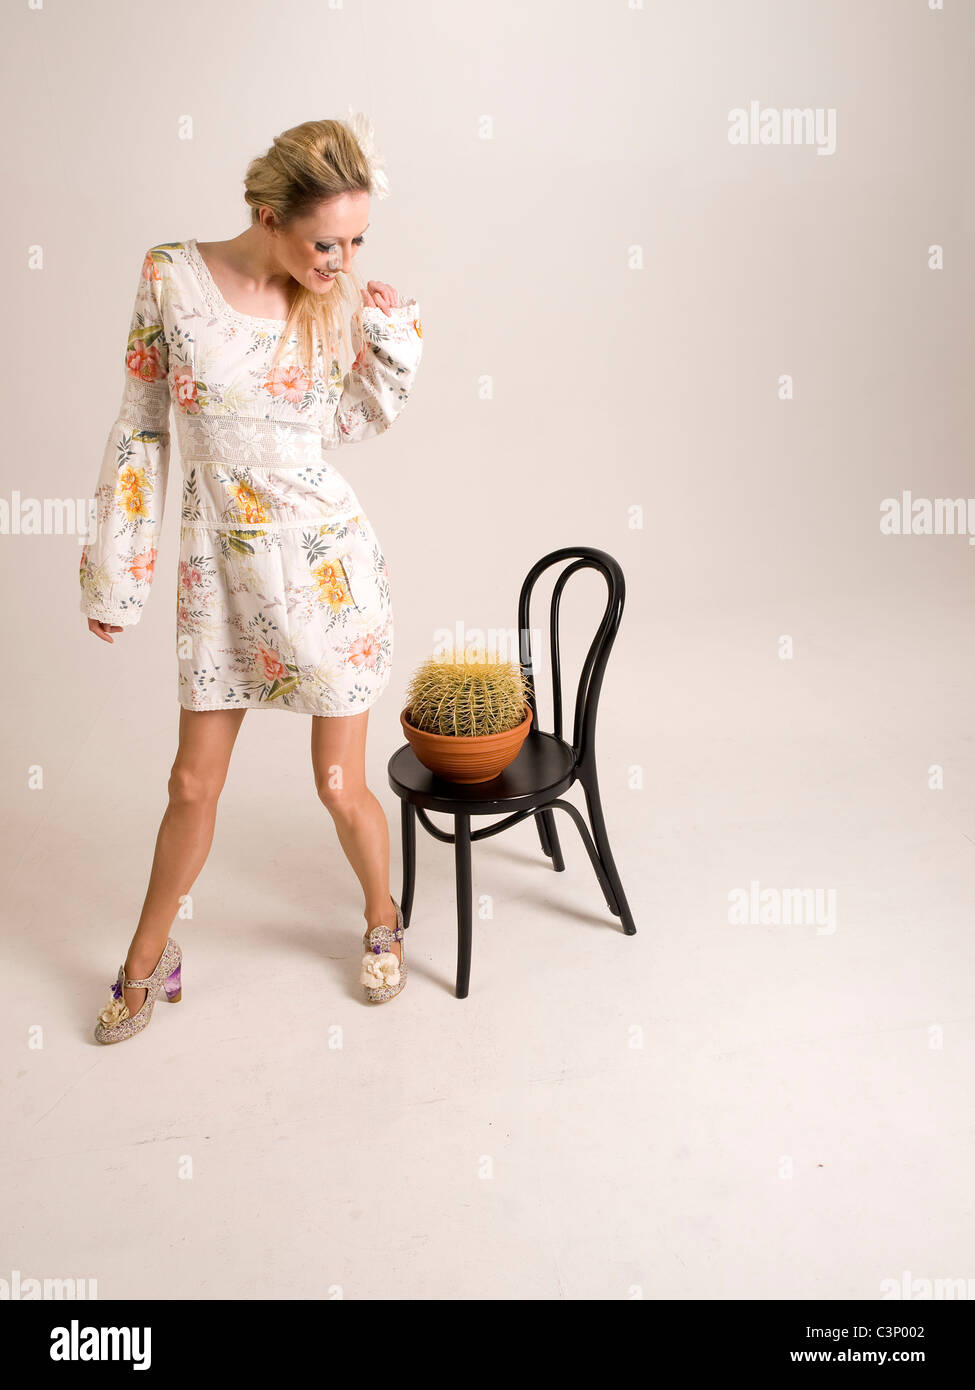 Amusing shot of attractive blond model pretending to sit on a cactus Stock Photo